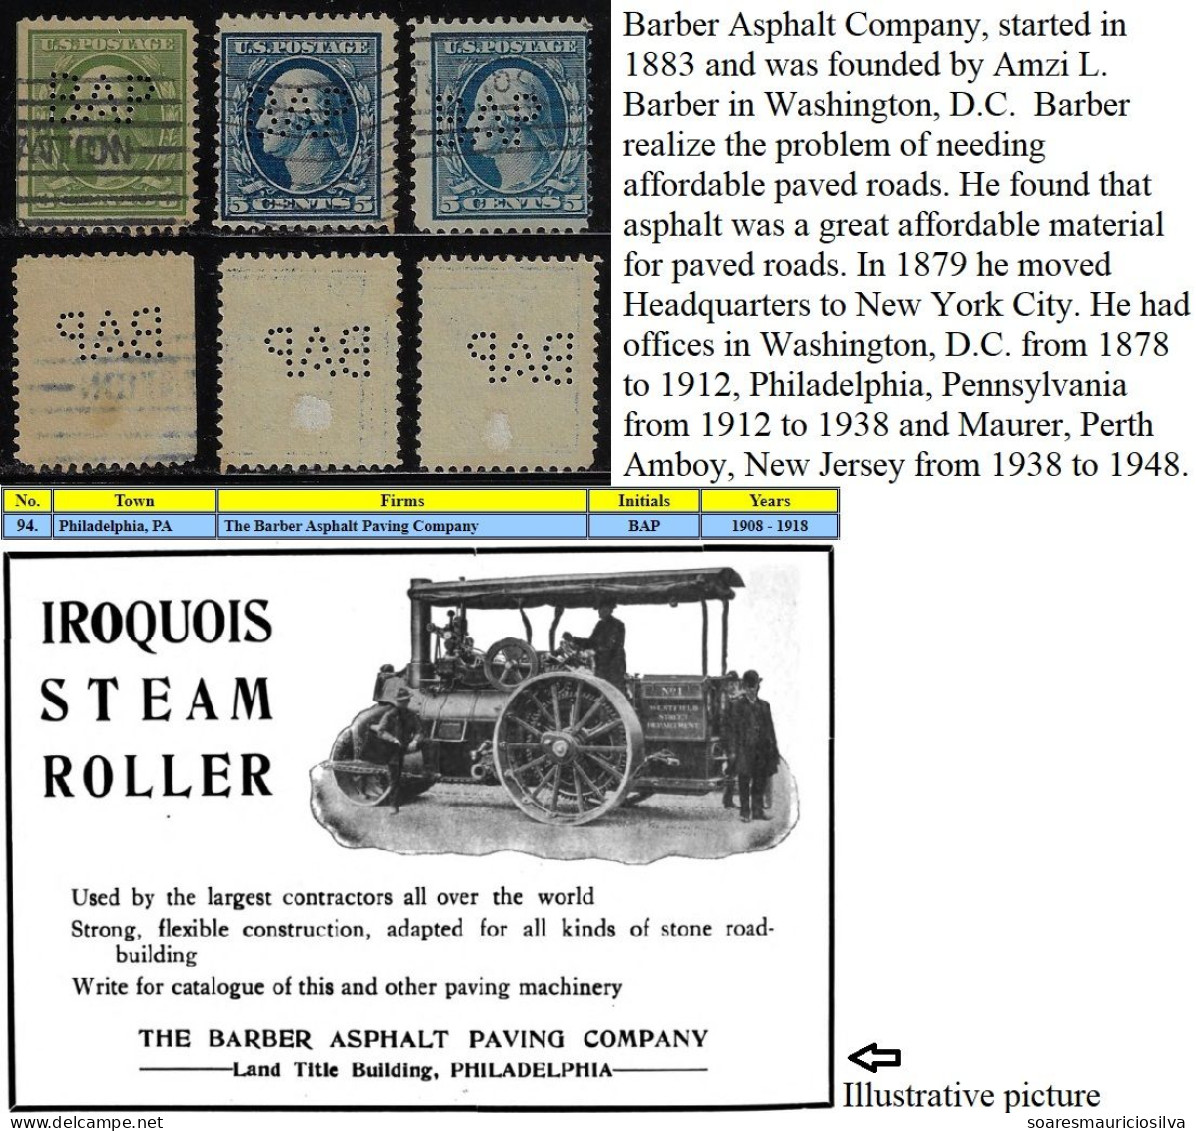 USA United States 1908/1918 3 Stamp Perfin BAP By The Barber Asphalt Paving Company From Philadelphia Lochung Perfore - Perfins